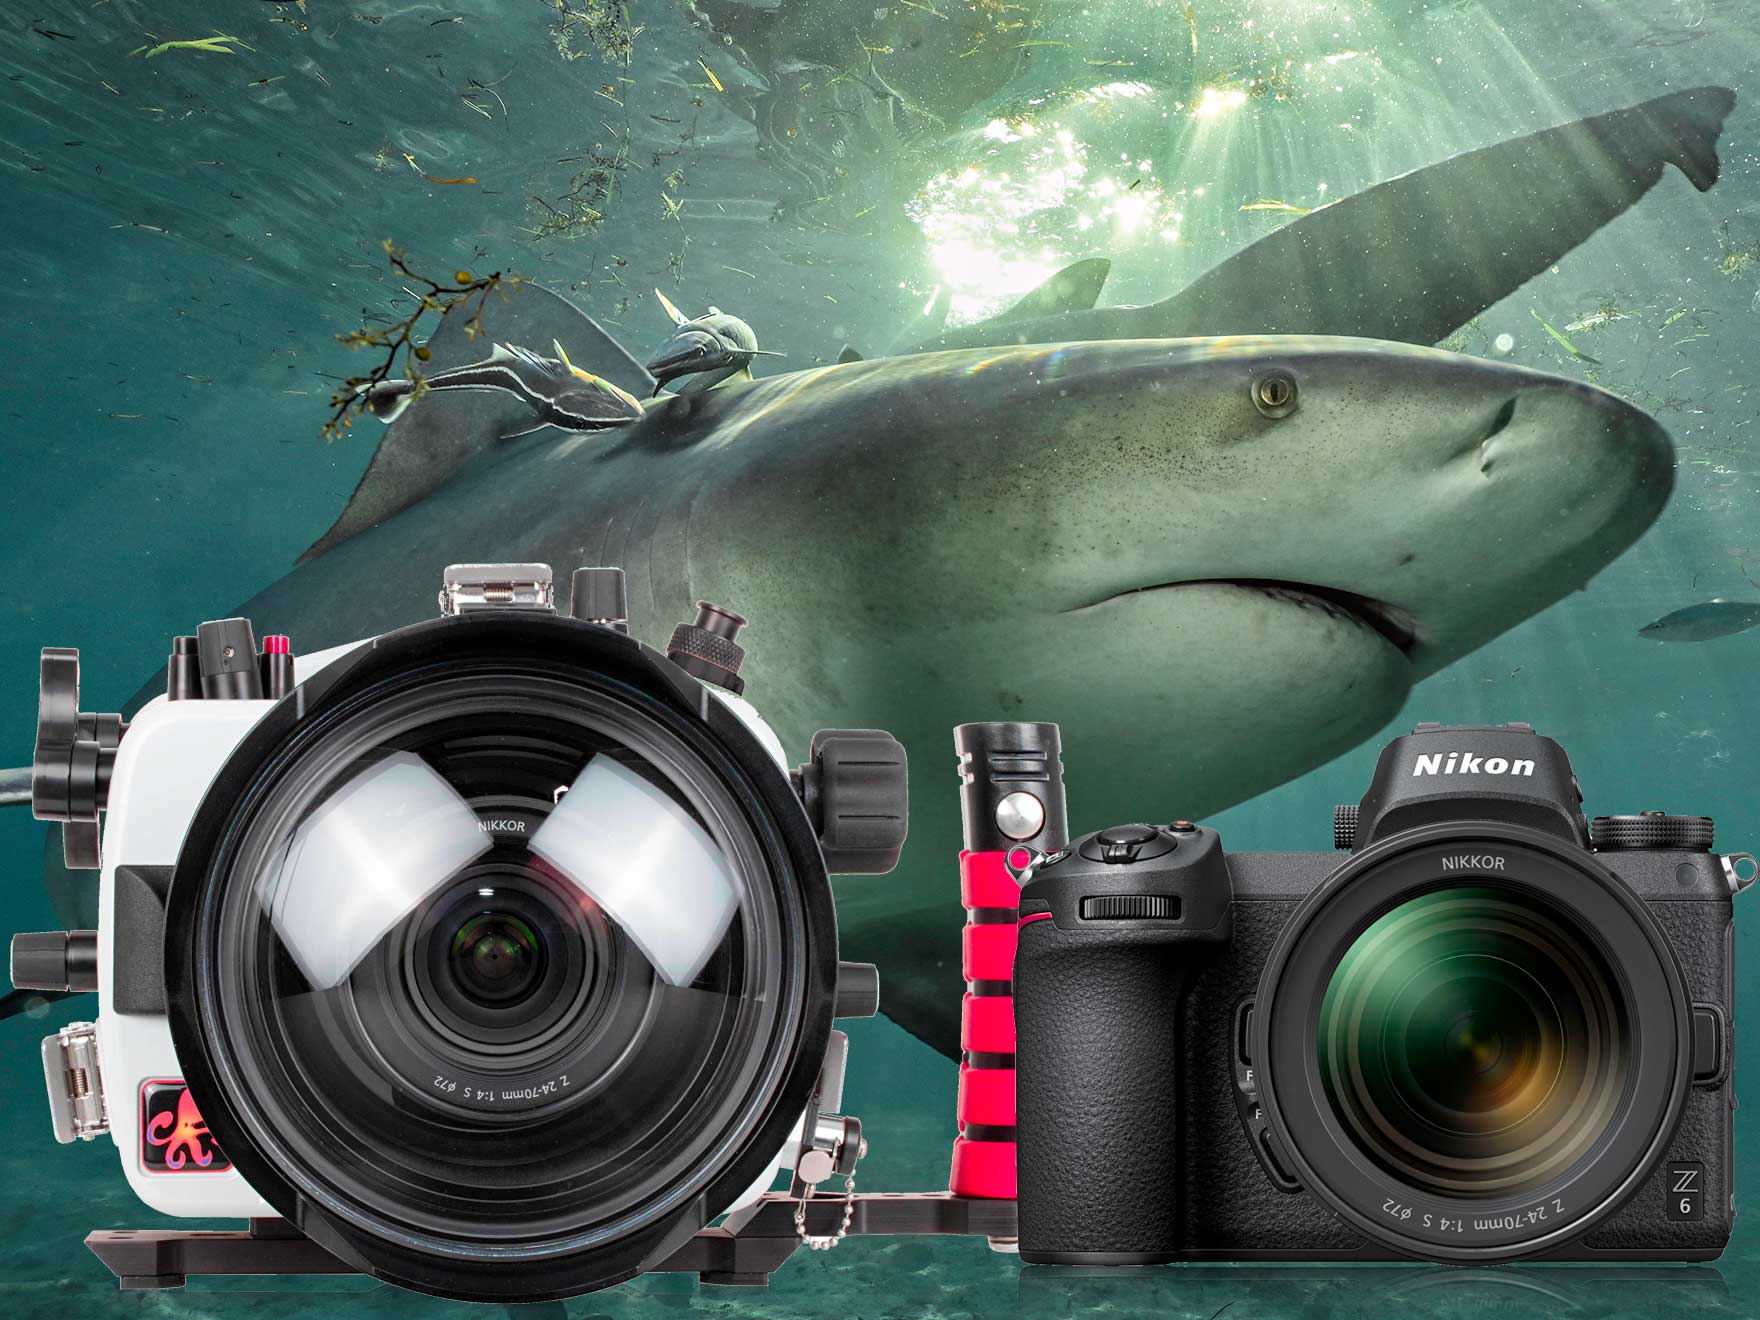 In the Water with the Nikon Z6 Full Frame Mirrorless Camera